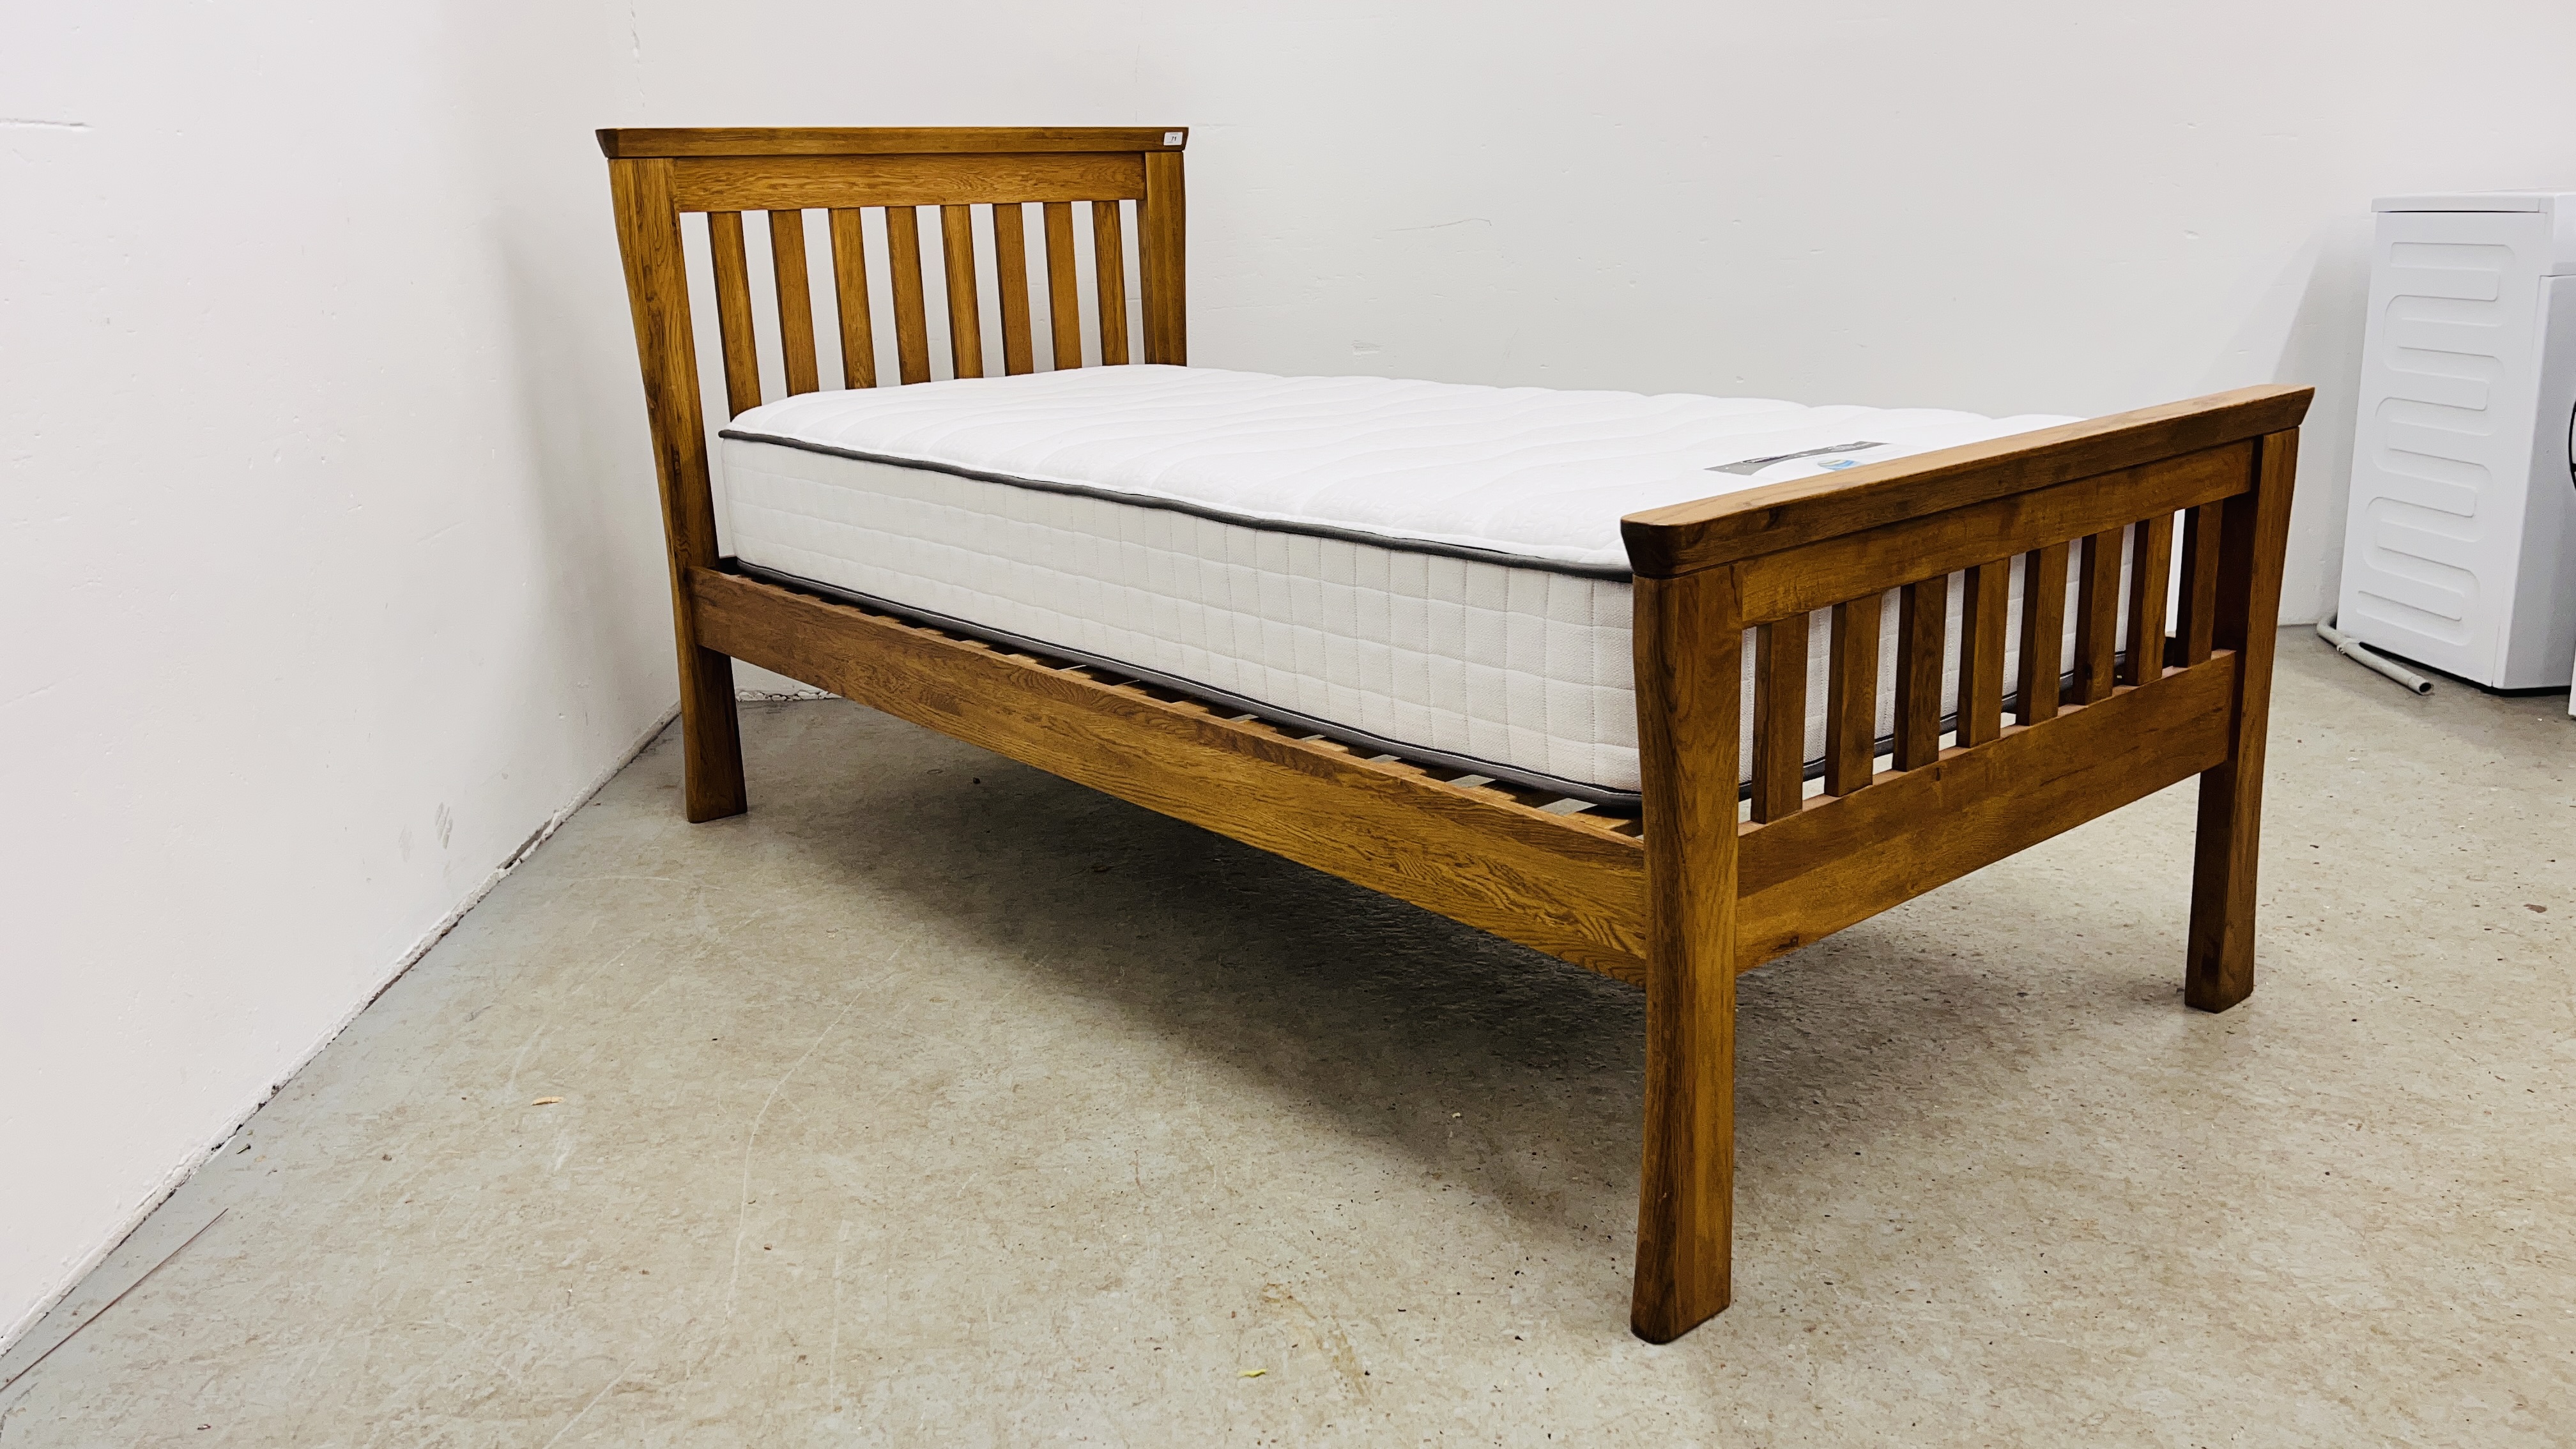 A GOOD QUALITY SOLID OAK SINGLE BED FRAME WITH SILENTNIGHT MIRROR POCKET 800 MEMORY MATTRESS. - Image 7 of 7